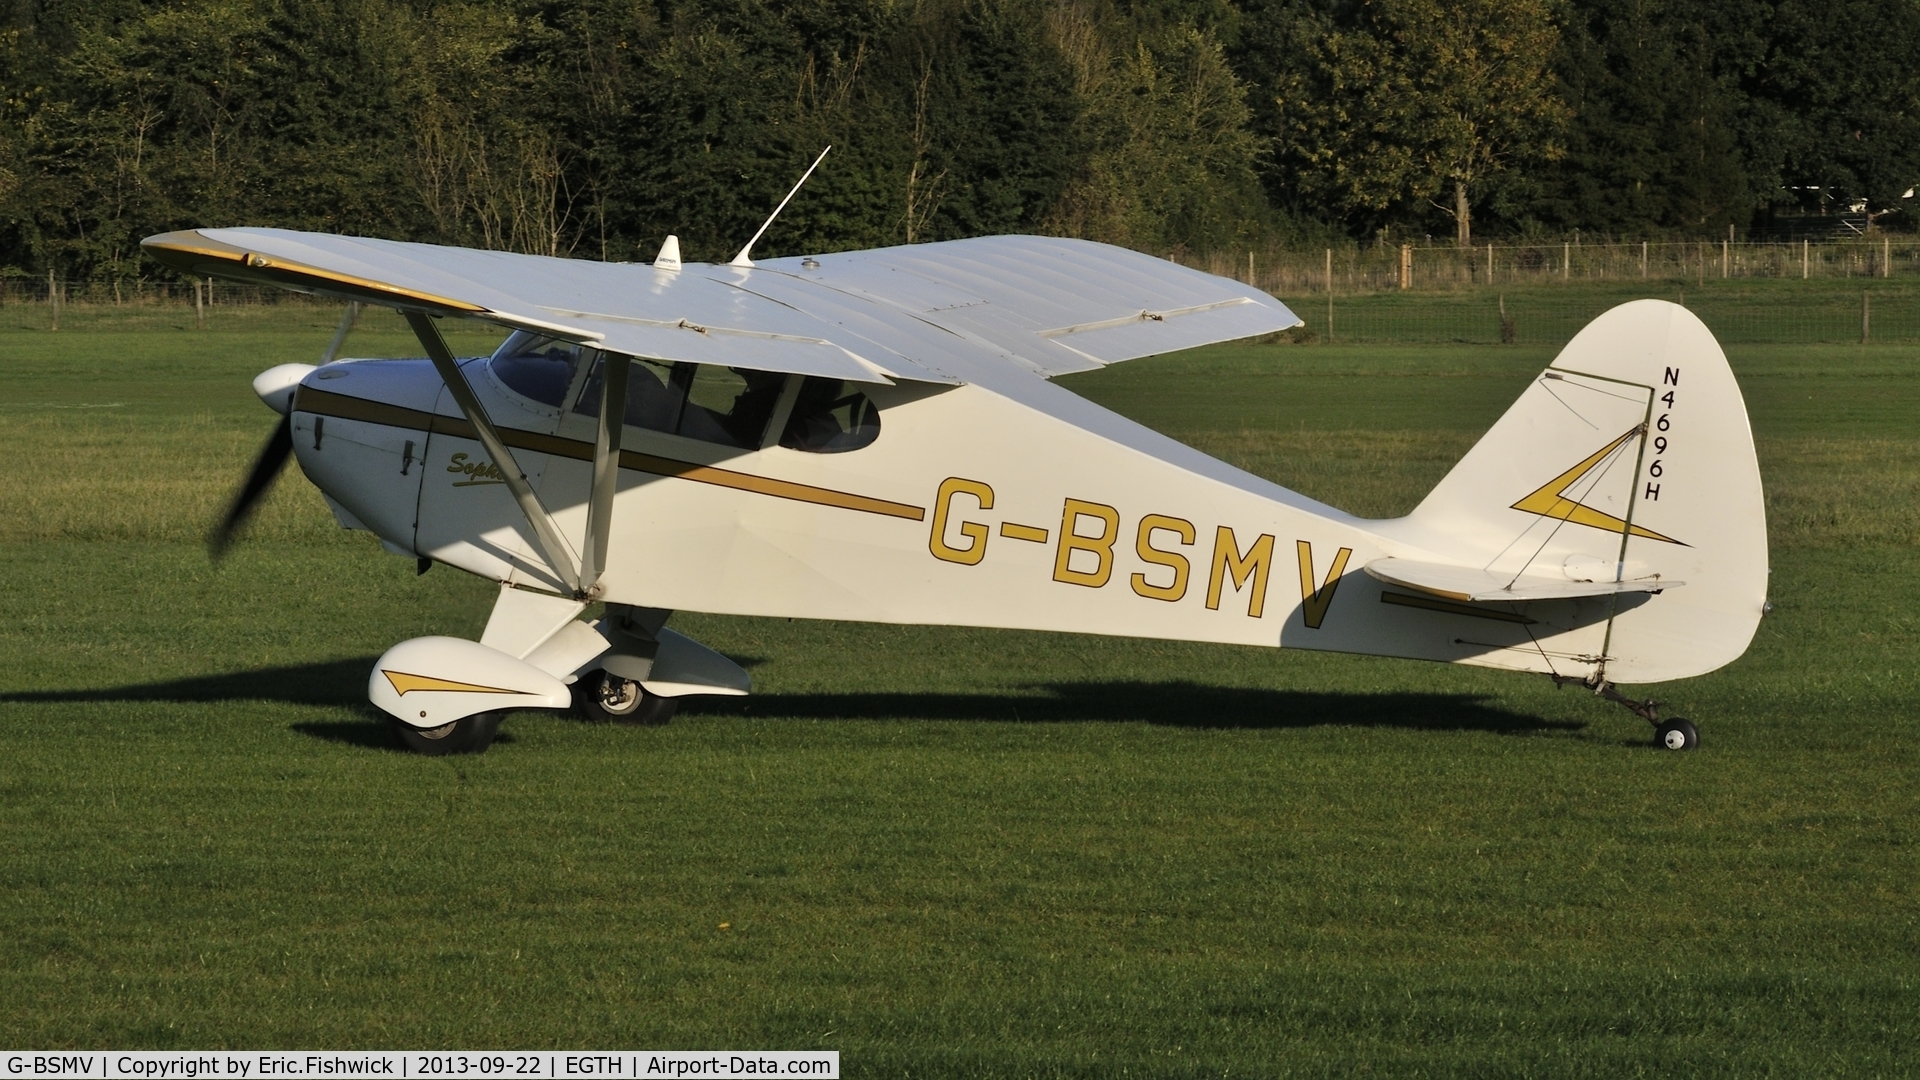 G-BSMV, 1948 Piper PA-17 Vagabond C/N 17-94, 1. G-BSMV preparing to depart the Shuttleworth Uncovered Air Display, Sept. 2013